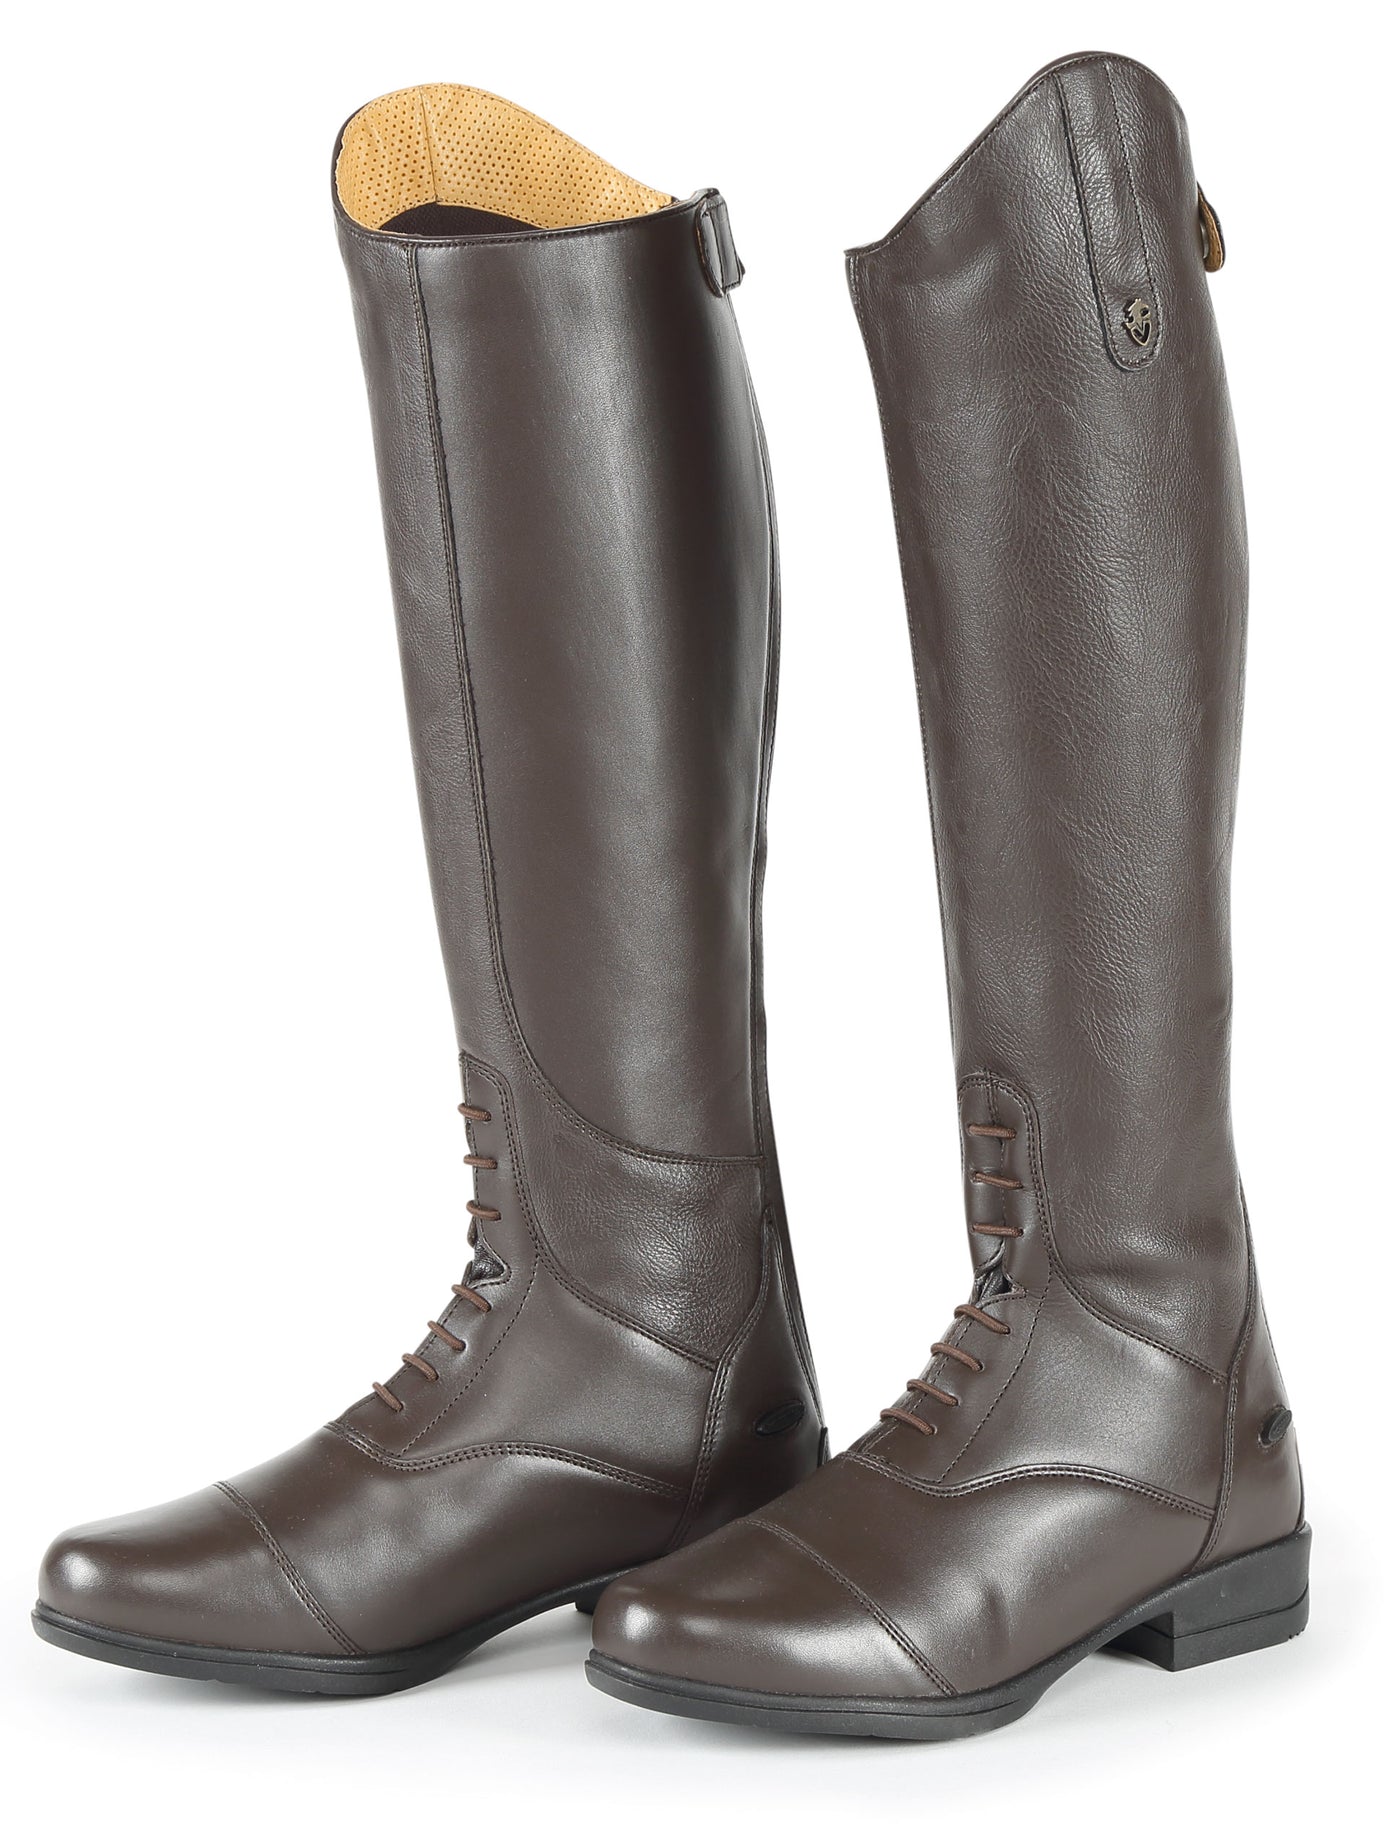 tall riding boots